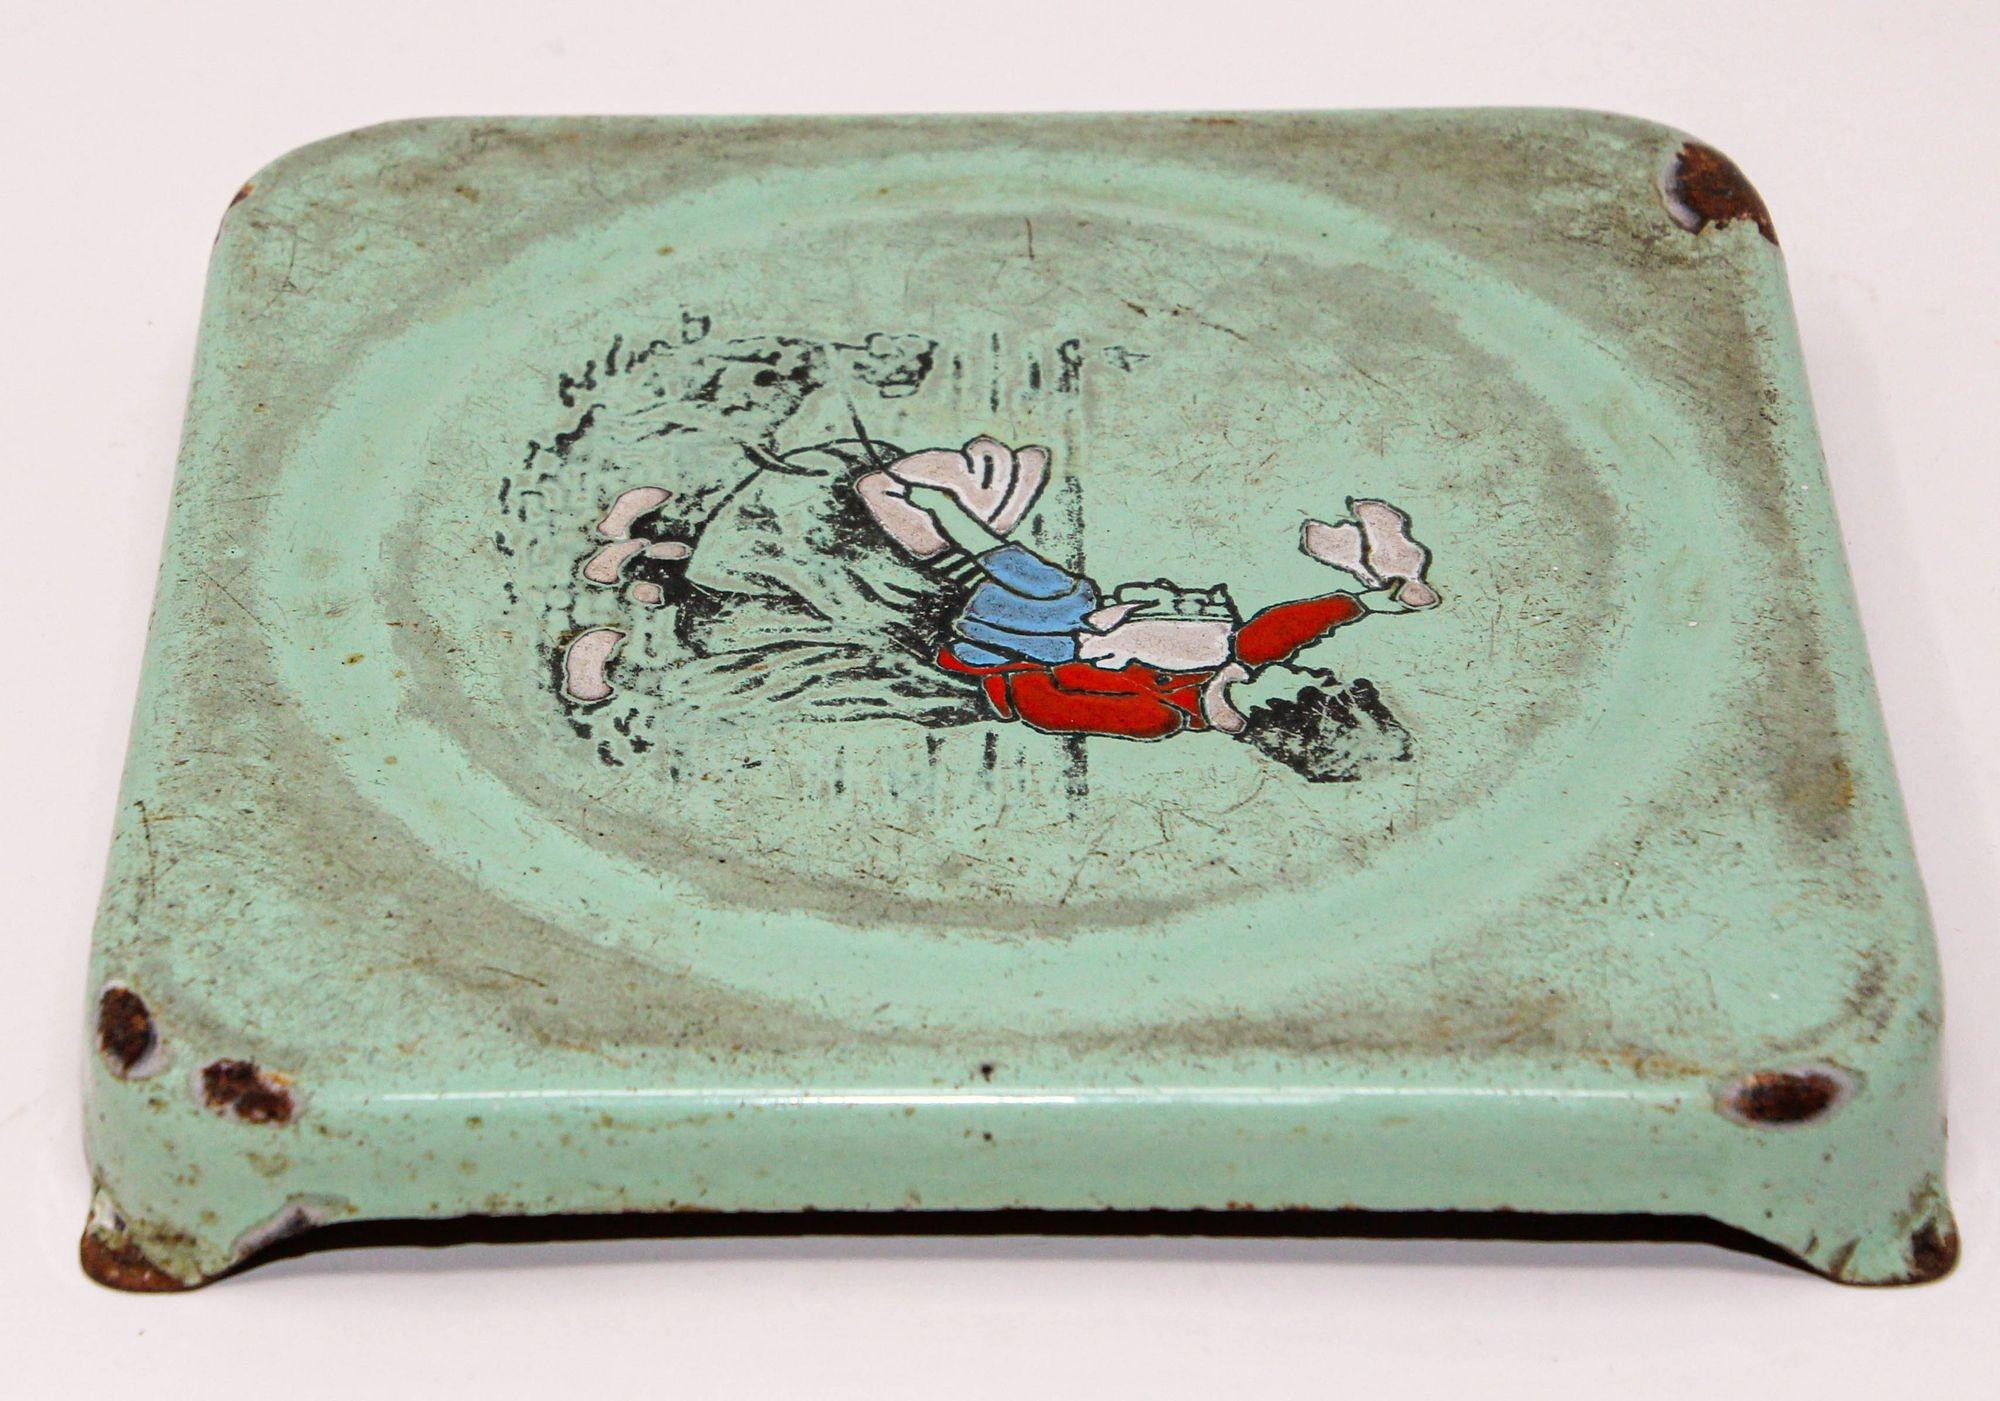 Antique Danish Hand Painted Dutch Theme Enamelware Metal Collectible Trivet 1920 In Fair Condition For Sale In North Hollywood, CA